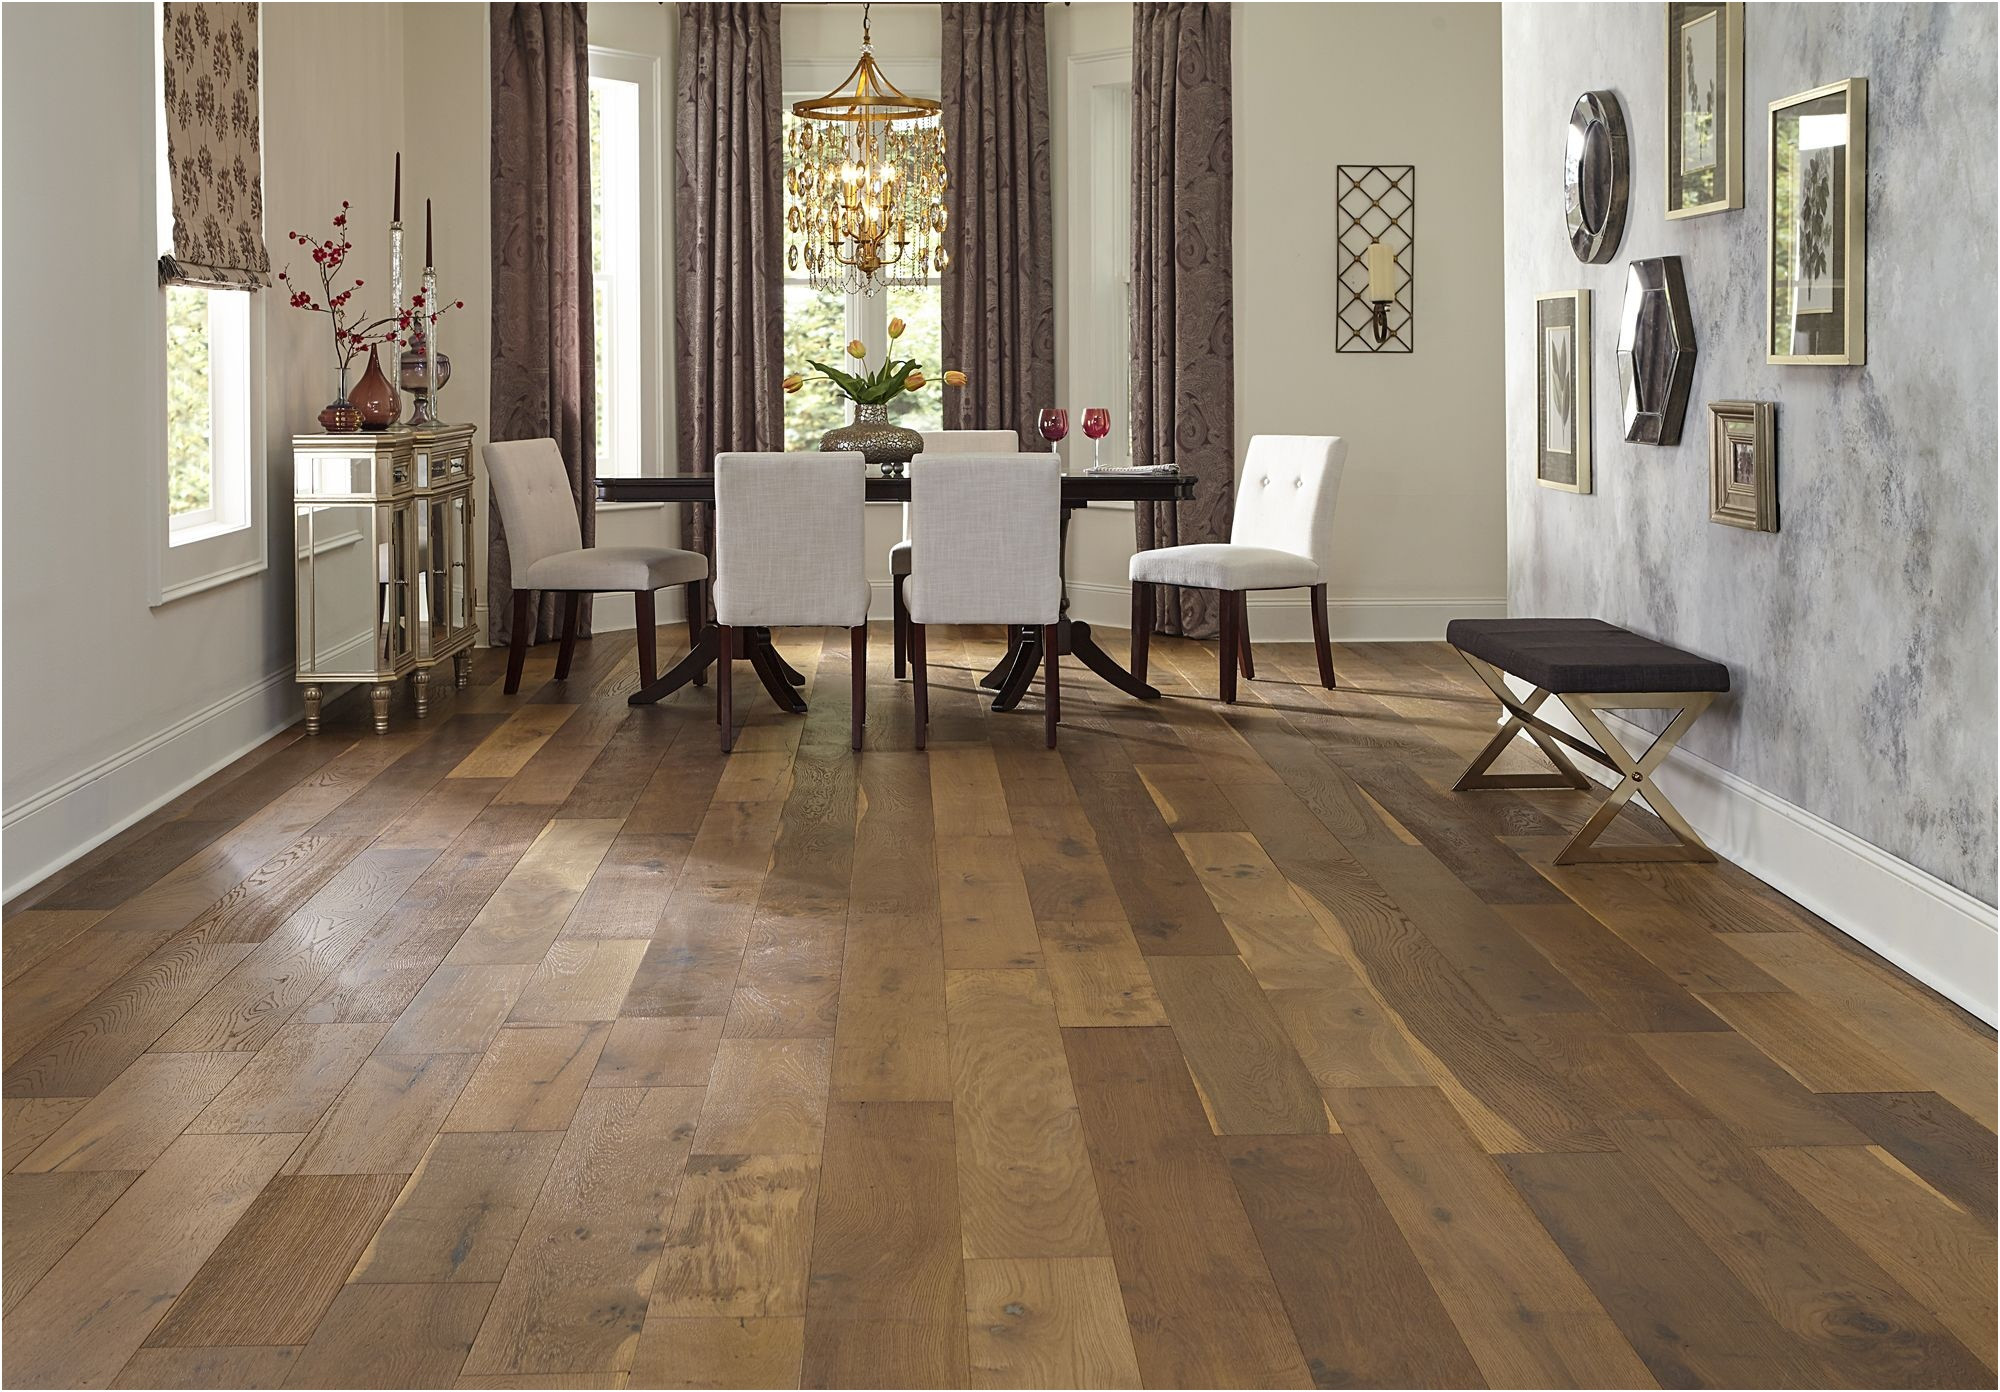 11 Stylish Wide Plank Hardwood Flooring 2024 free download wide plank hardwood flooring of wide plank french oak flooring beautiful 7 1 2 wide planks and a in wide plank french oak flooring beautiful 7 1 2 wide planks and a rustic look